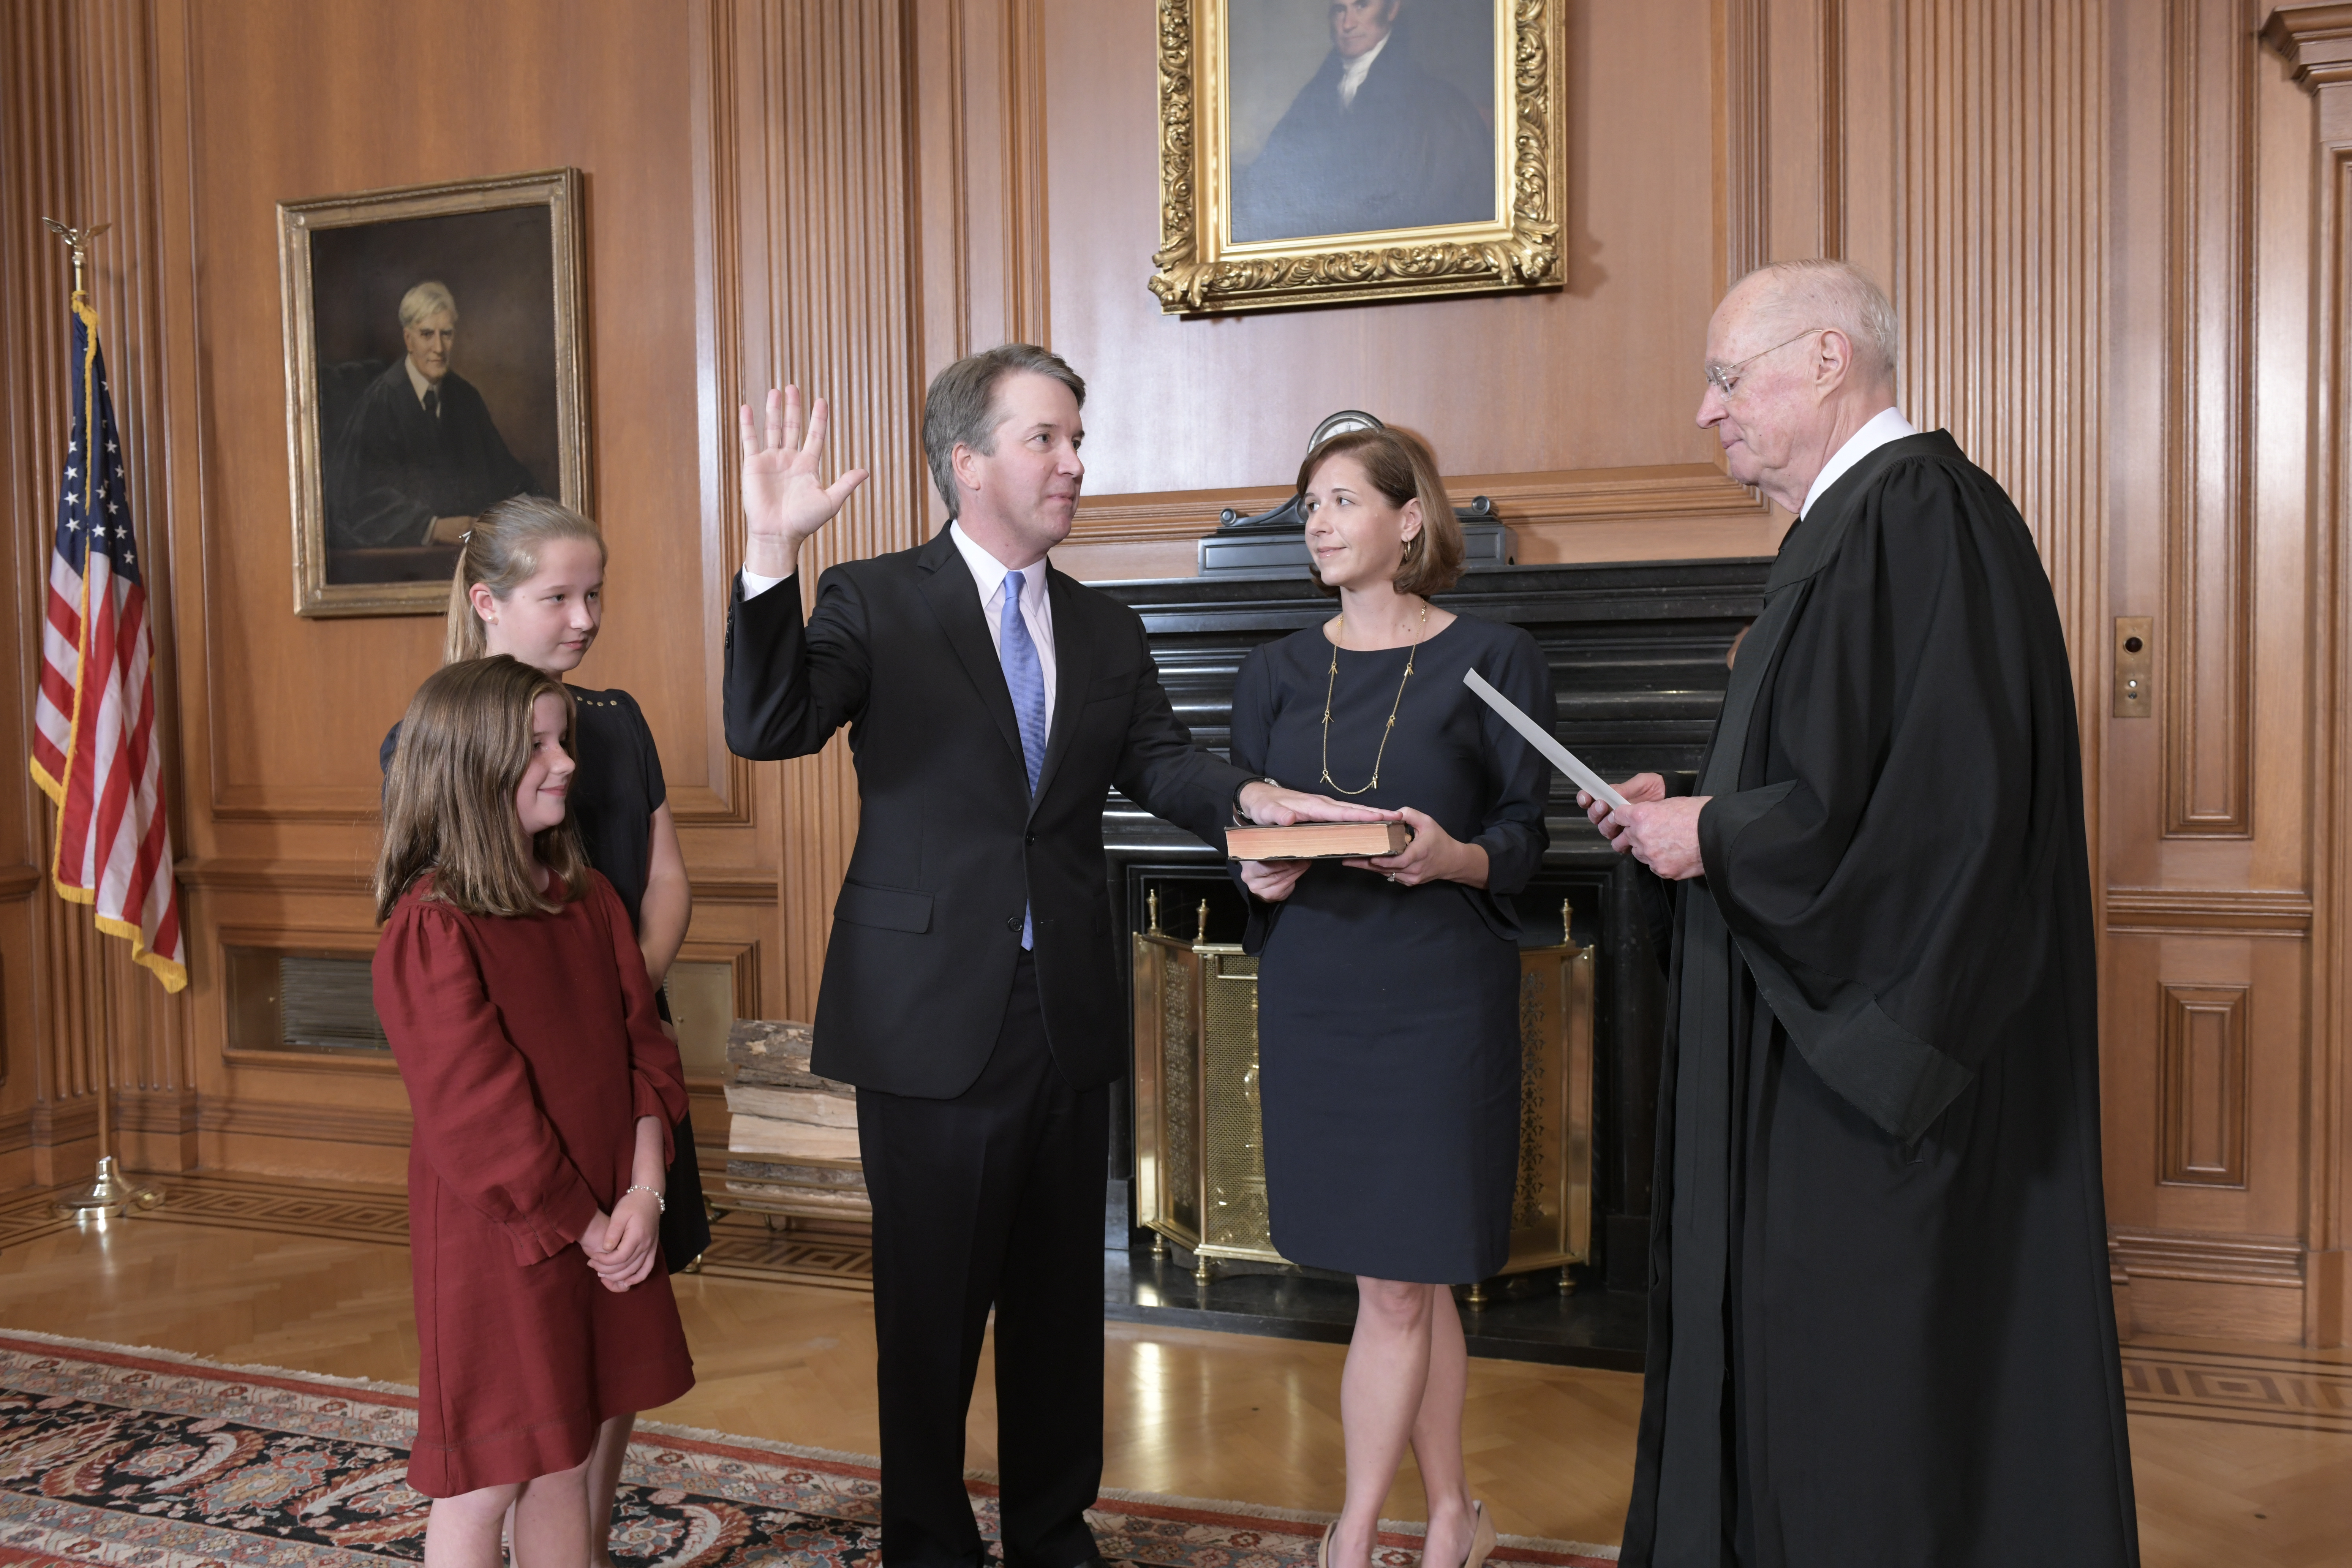 WASHINGTON, DC - OCTOBER 6: In this handout photo provided by the Supreme Court of the United States, Justice Anthony M. Kennedy, (Retired) administers the Judicial Oath to Judge Brett M. Kavanaugh as his wife Ashley Kavanaugh holds the Bible while joined by their daughters Margaret and Liza, in the Justices Conference Room at the Supreme Court Building on October 6, 2018 in Washington, DC. (Photo by Fred Schilling/Supreme Court of the United States via Getty Images)